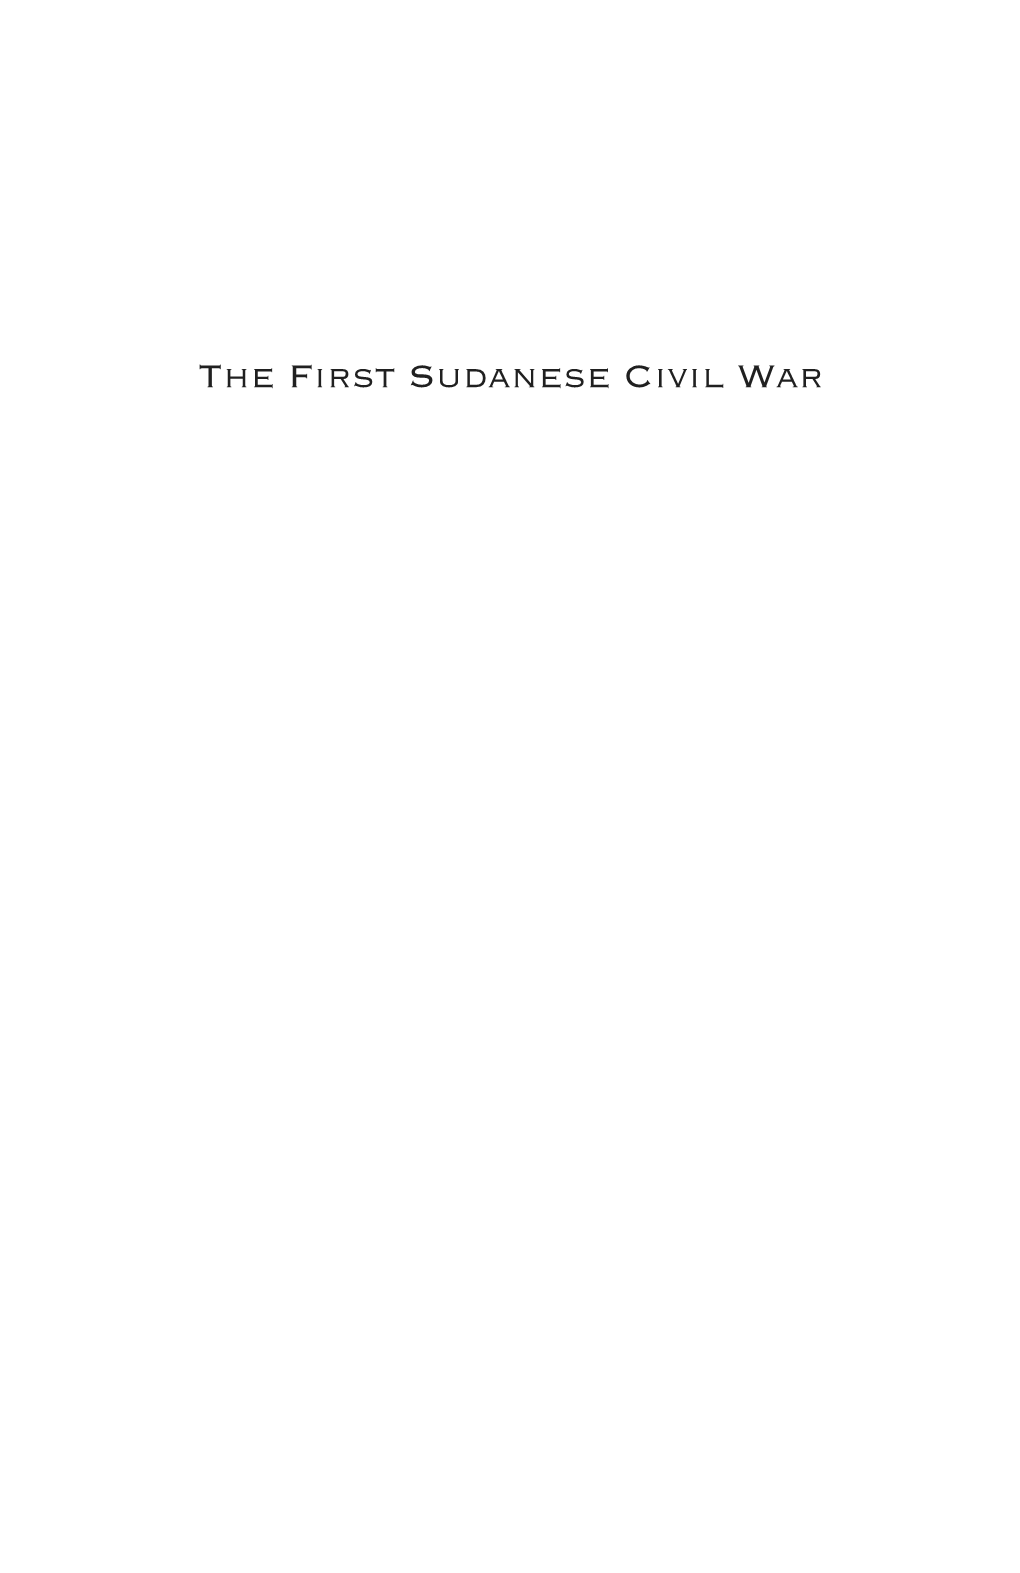 The First Sudanese Civil War This Page Intentionally Left Blank the First Sudanese Civil War